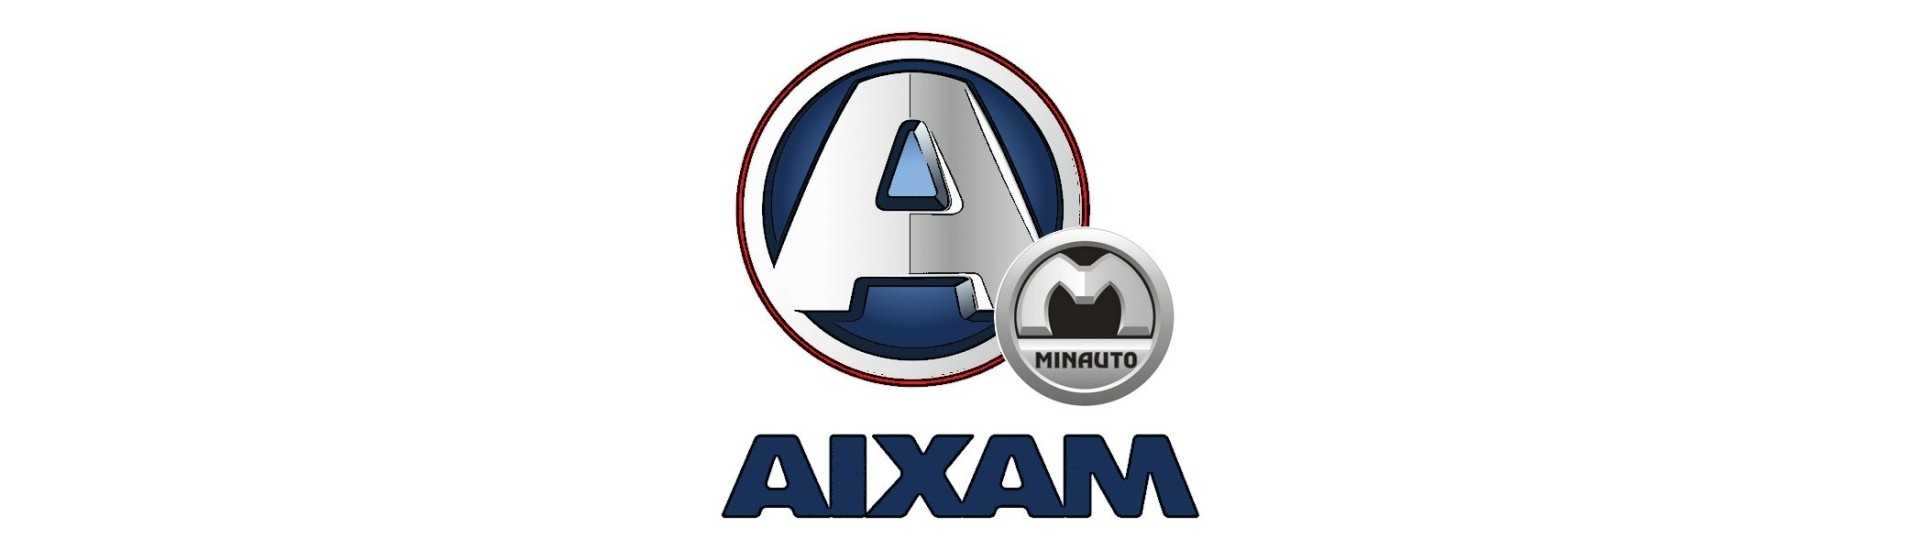 Brake jaw at best price car without a permit Aixam Minauto